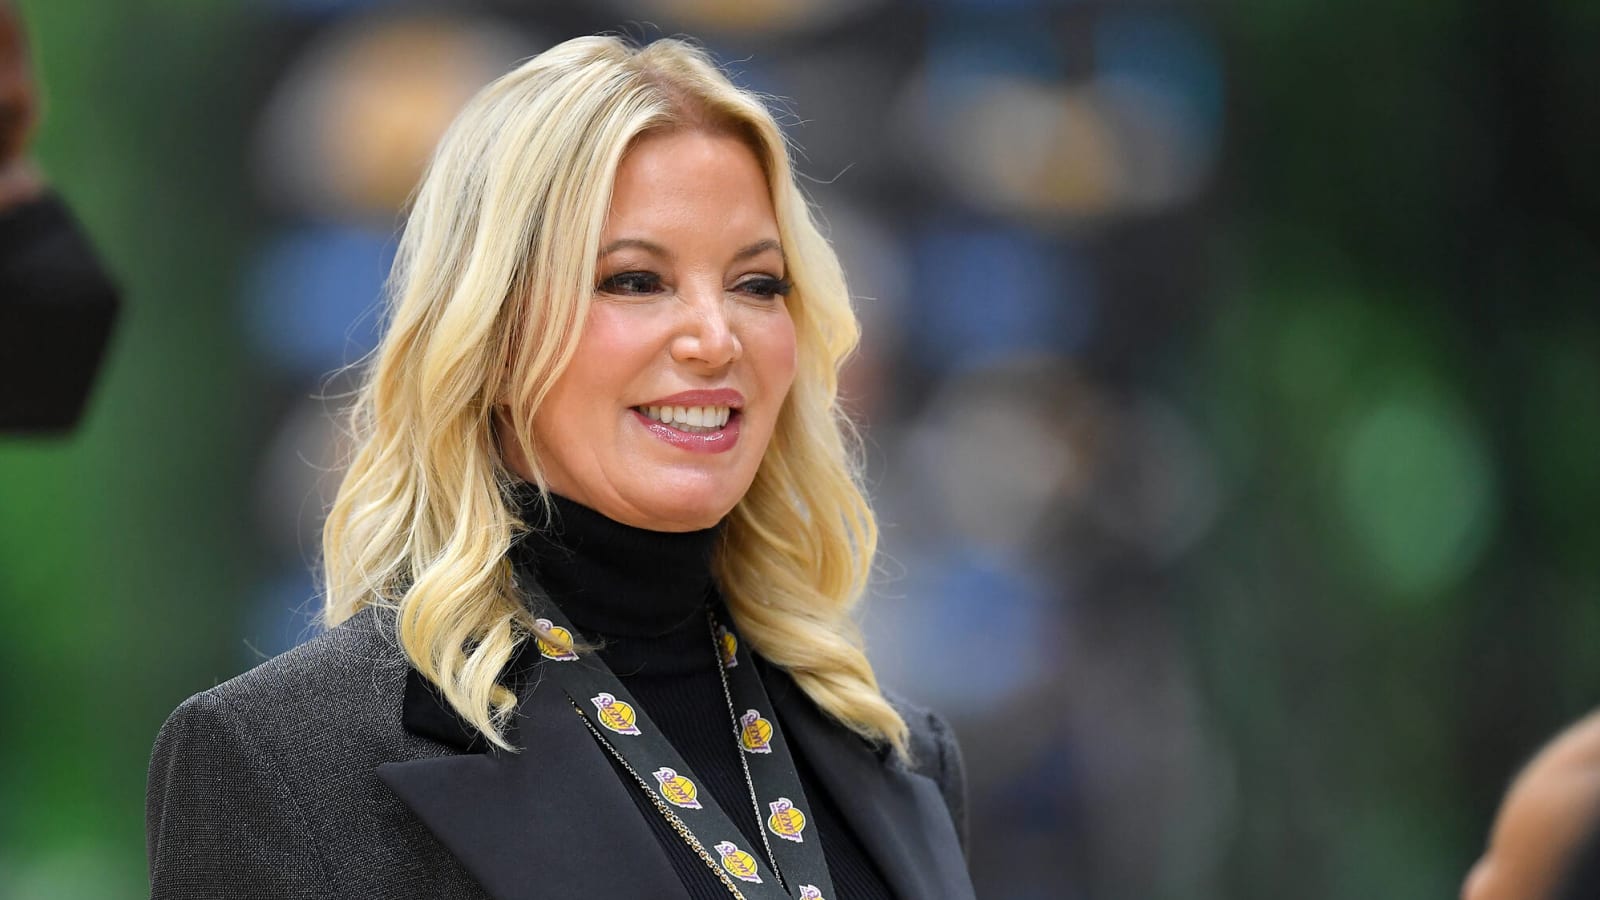  Jeanie Buss Discusses Her Portrayal By Hadley Robinson In ‘Winning Time’